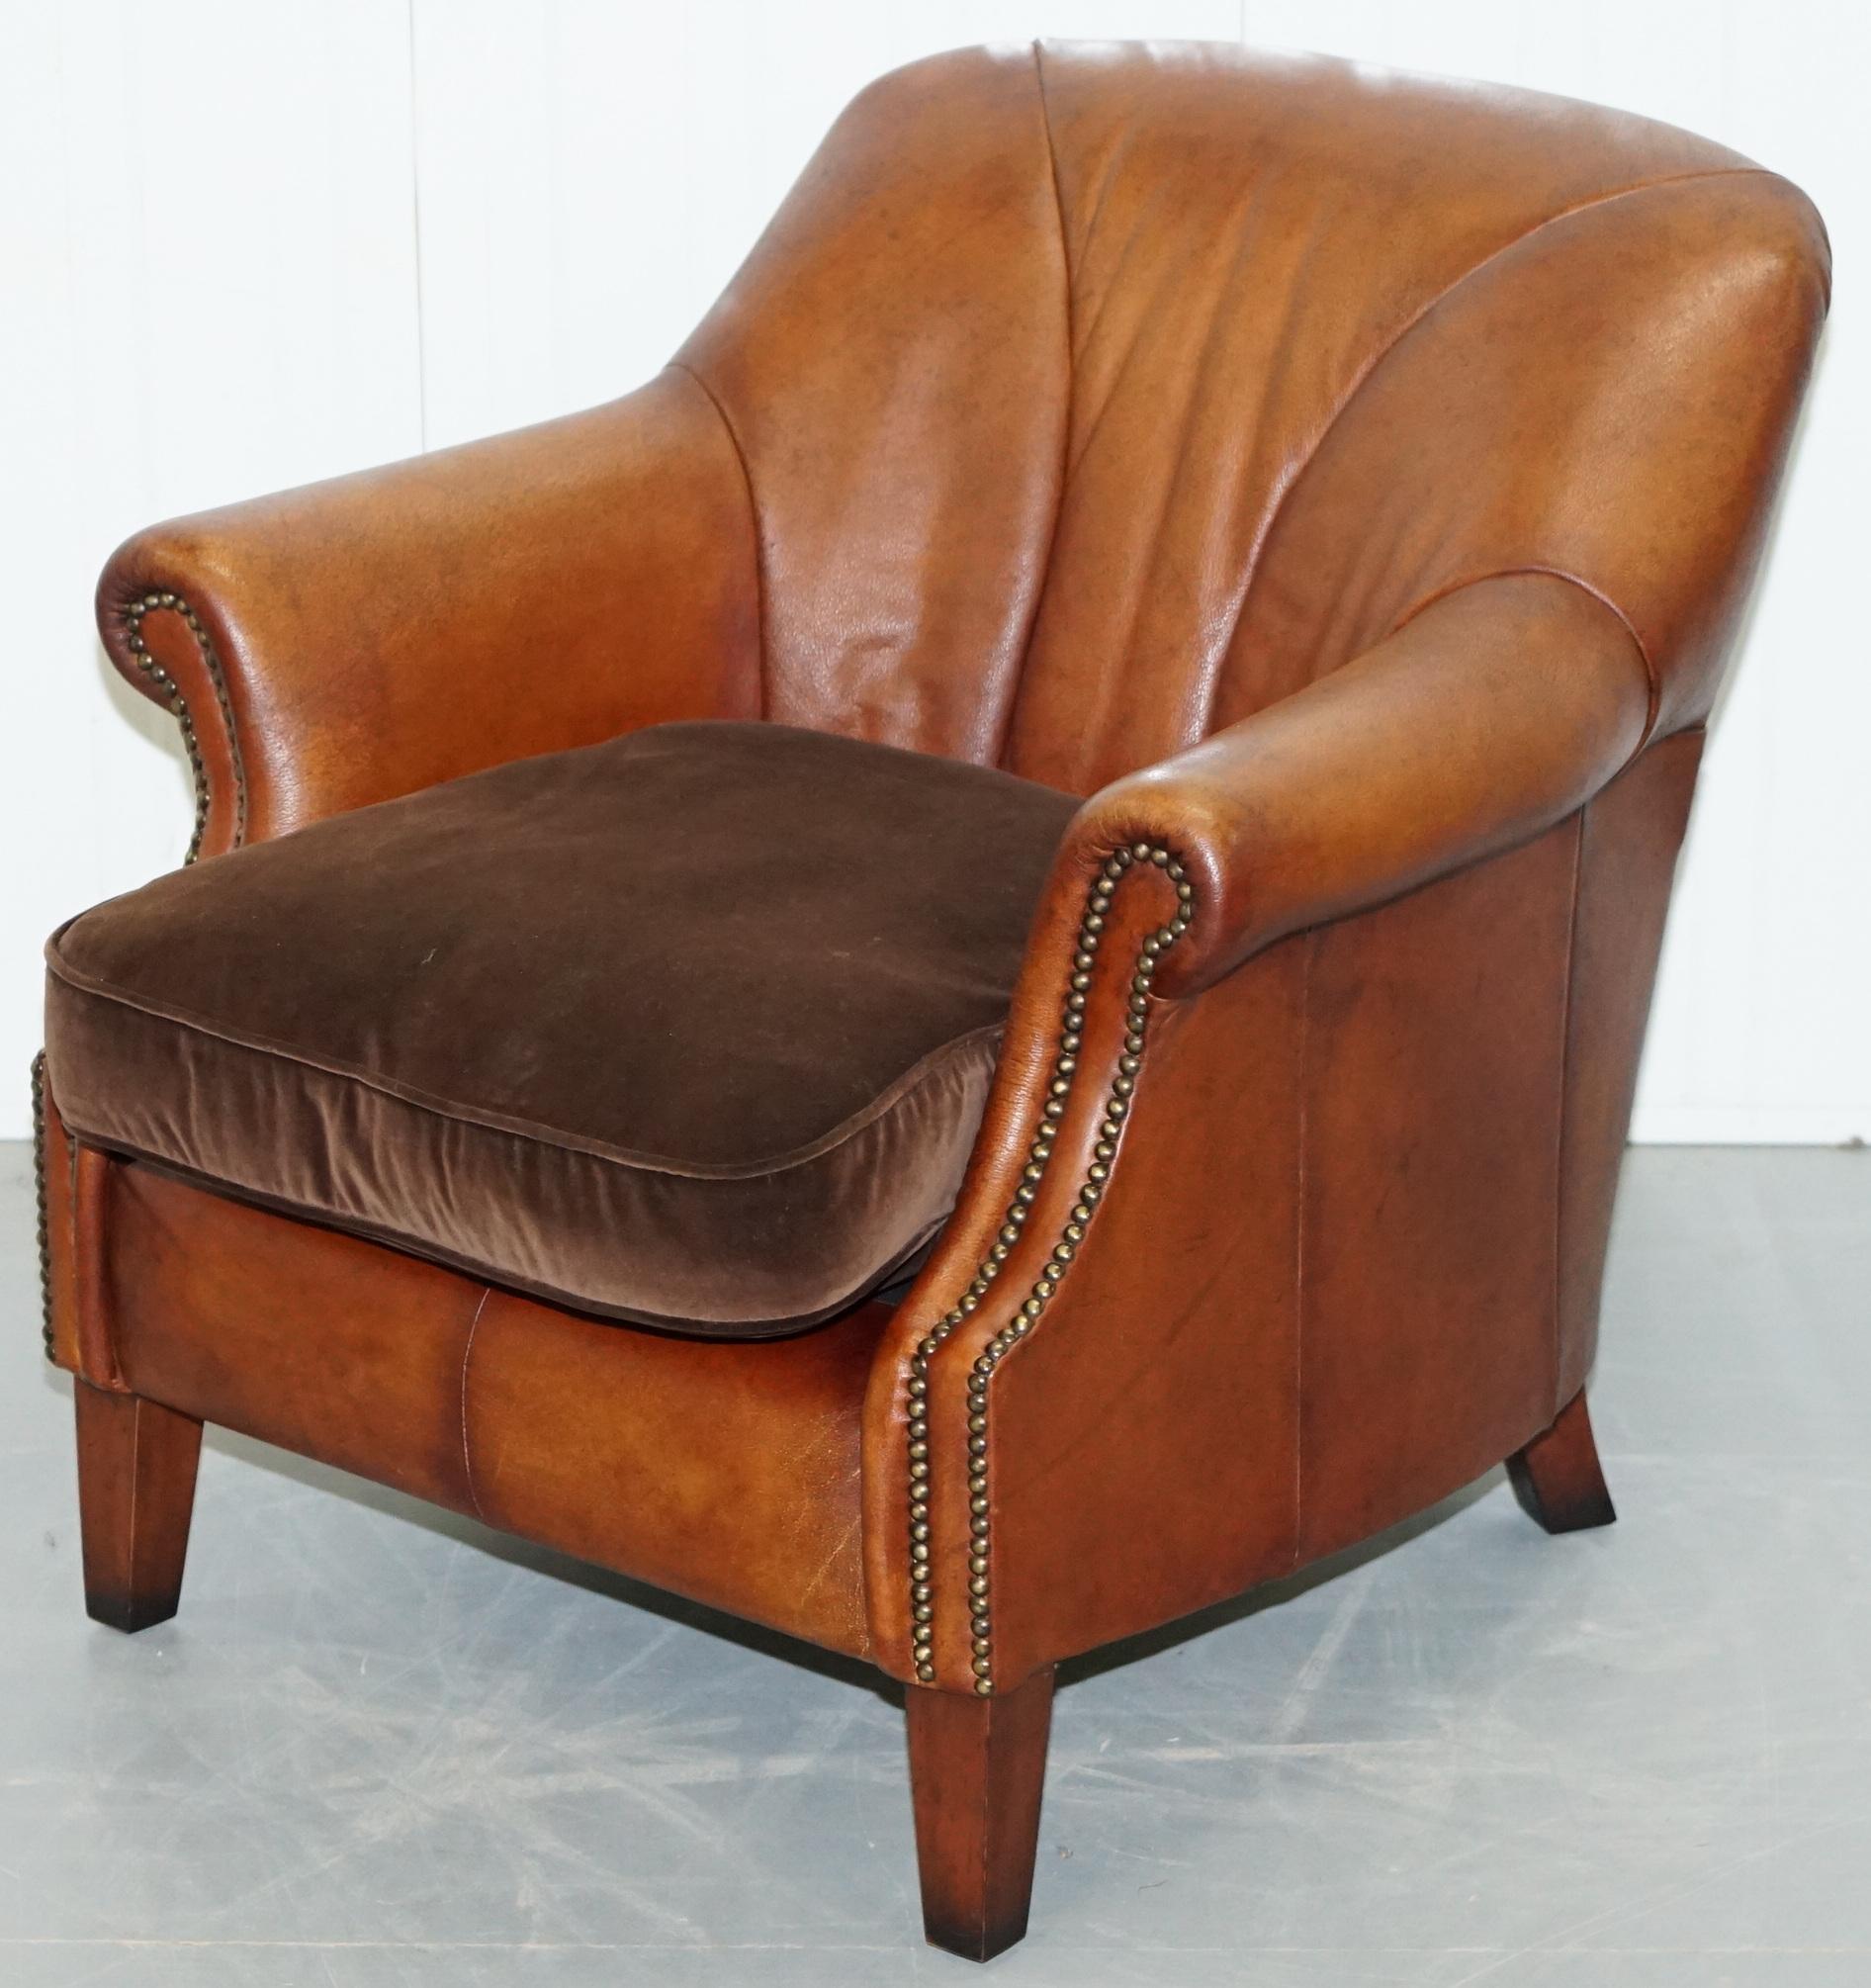 john lewis leather chair